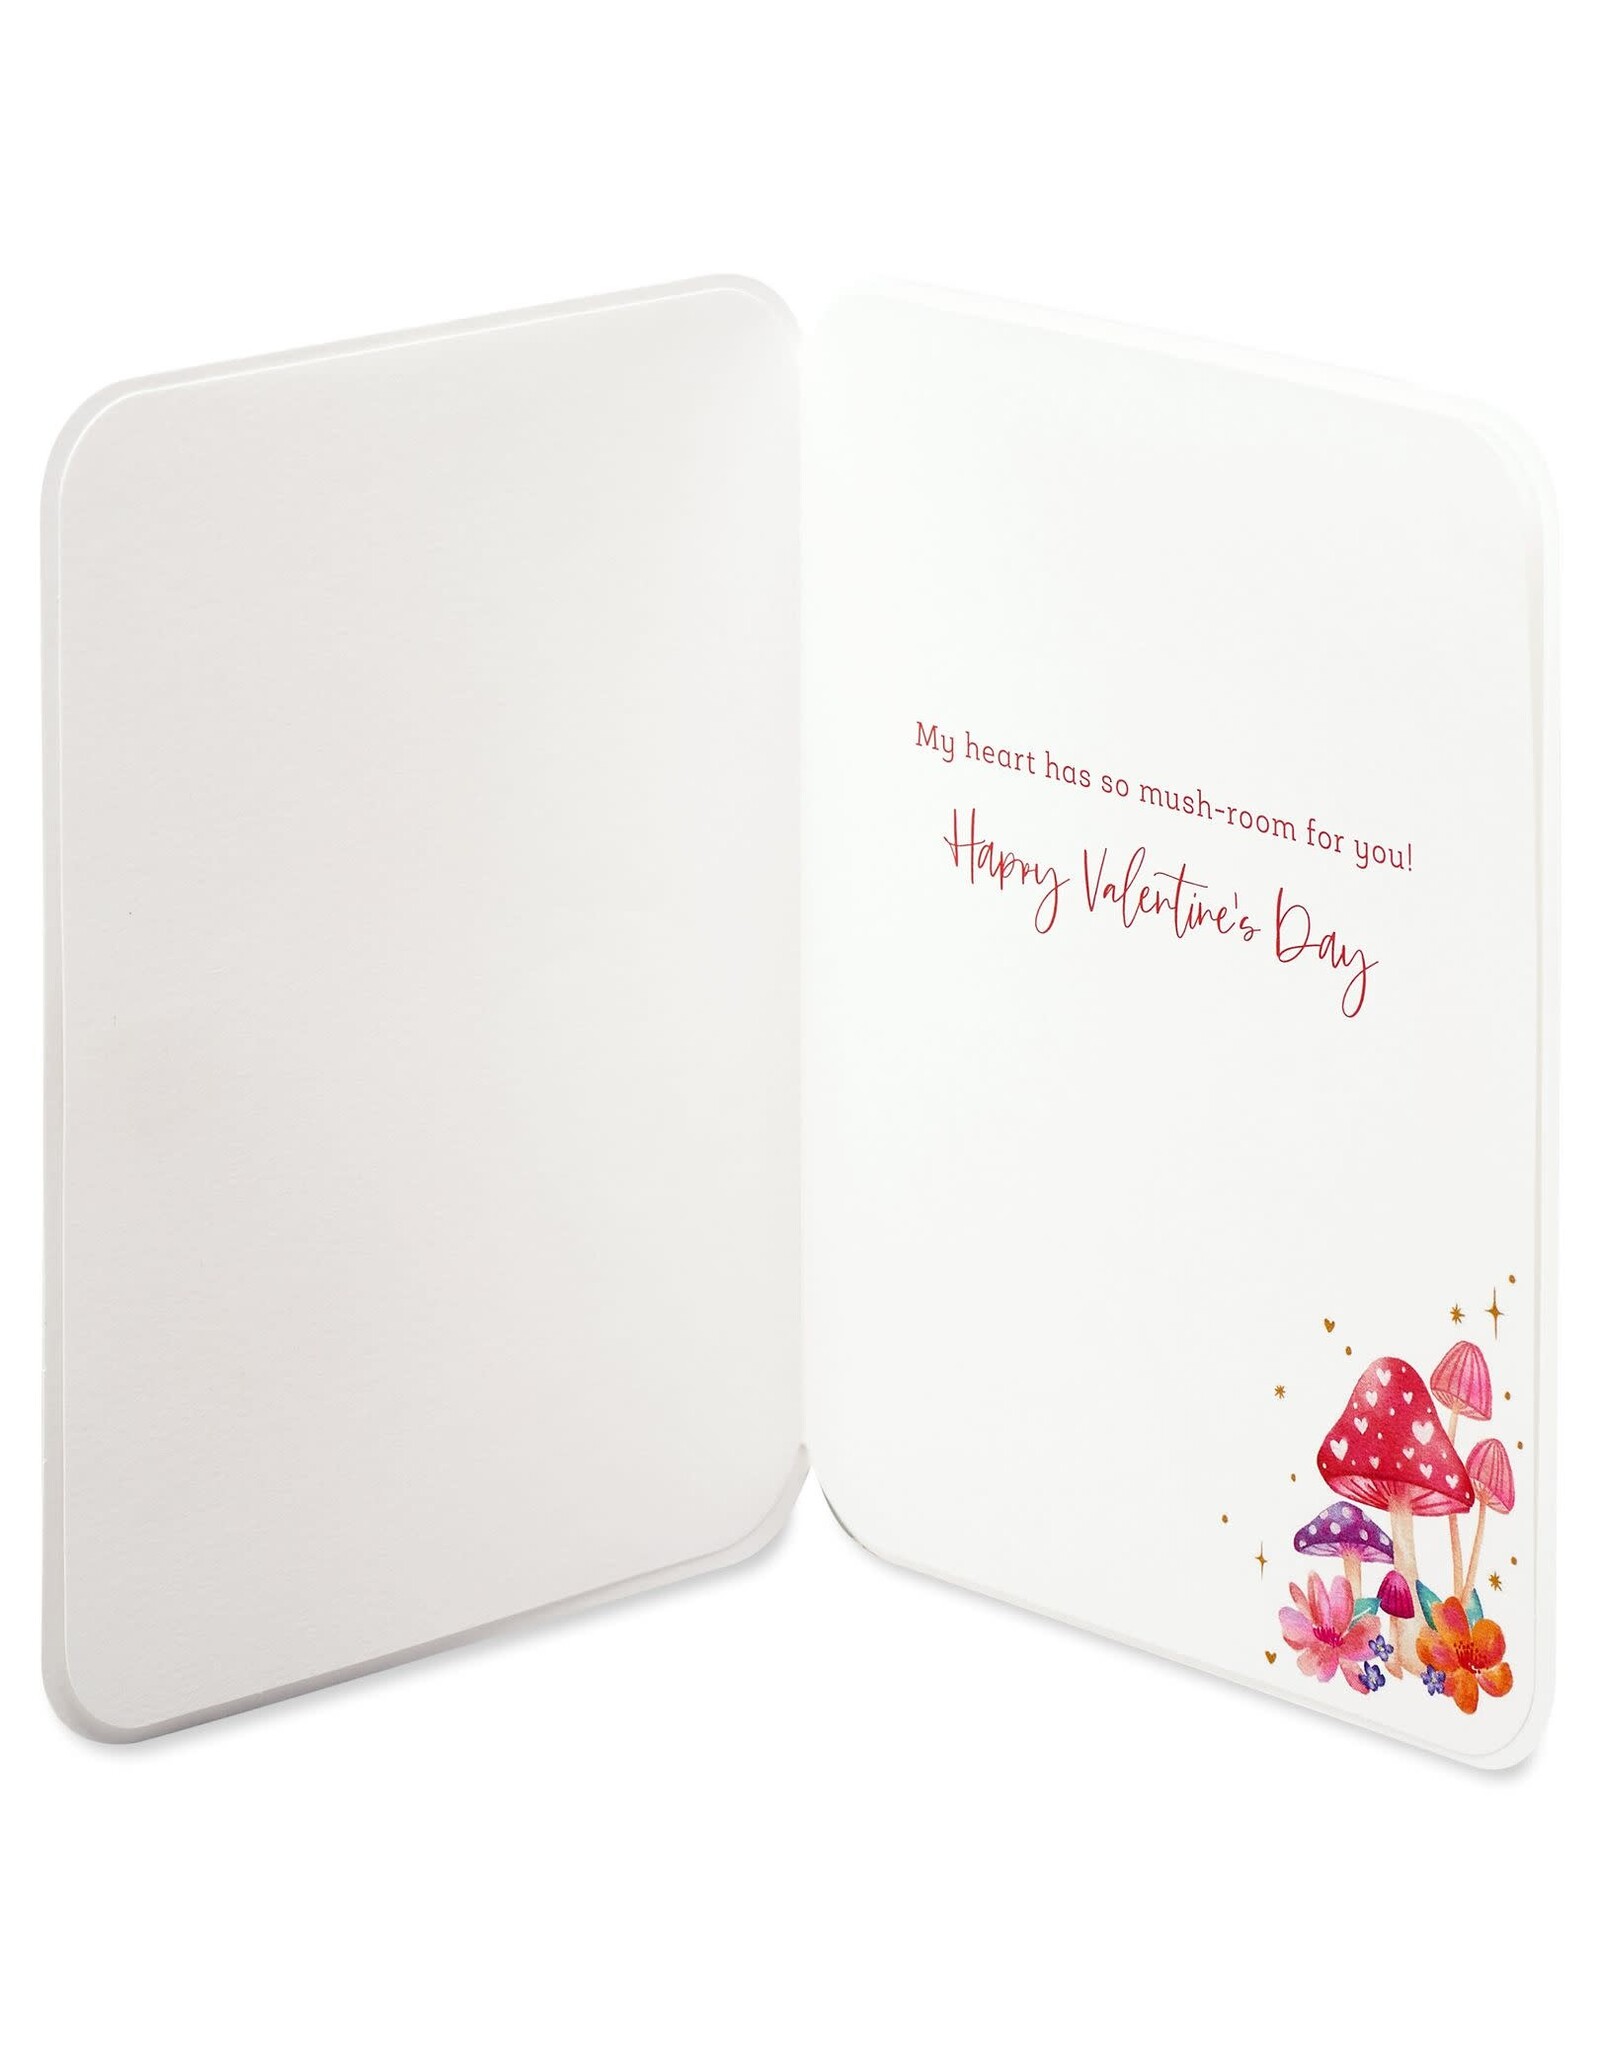 PAPYRUS® Valentine's Day Card My Heart Has So Mush-Room For You